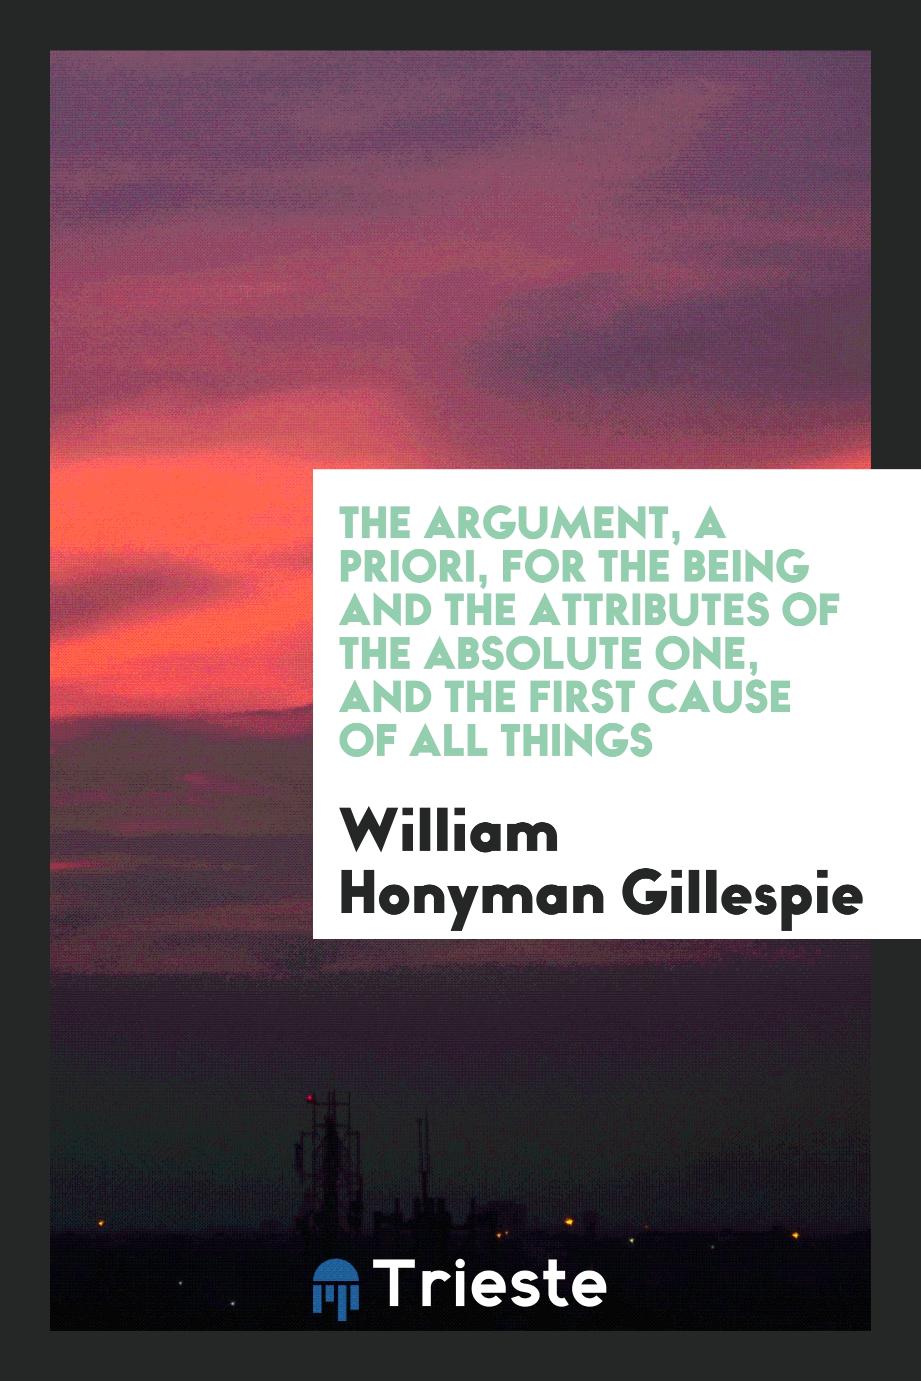 The Argument, a Priori, for the Being and the Attributes of the Absolute One, and the First Cause of All Things